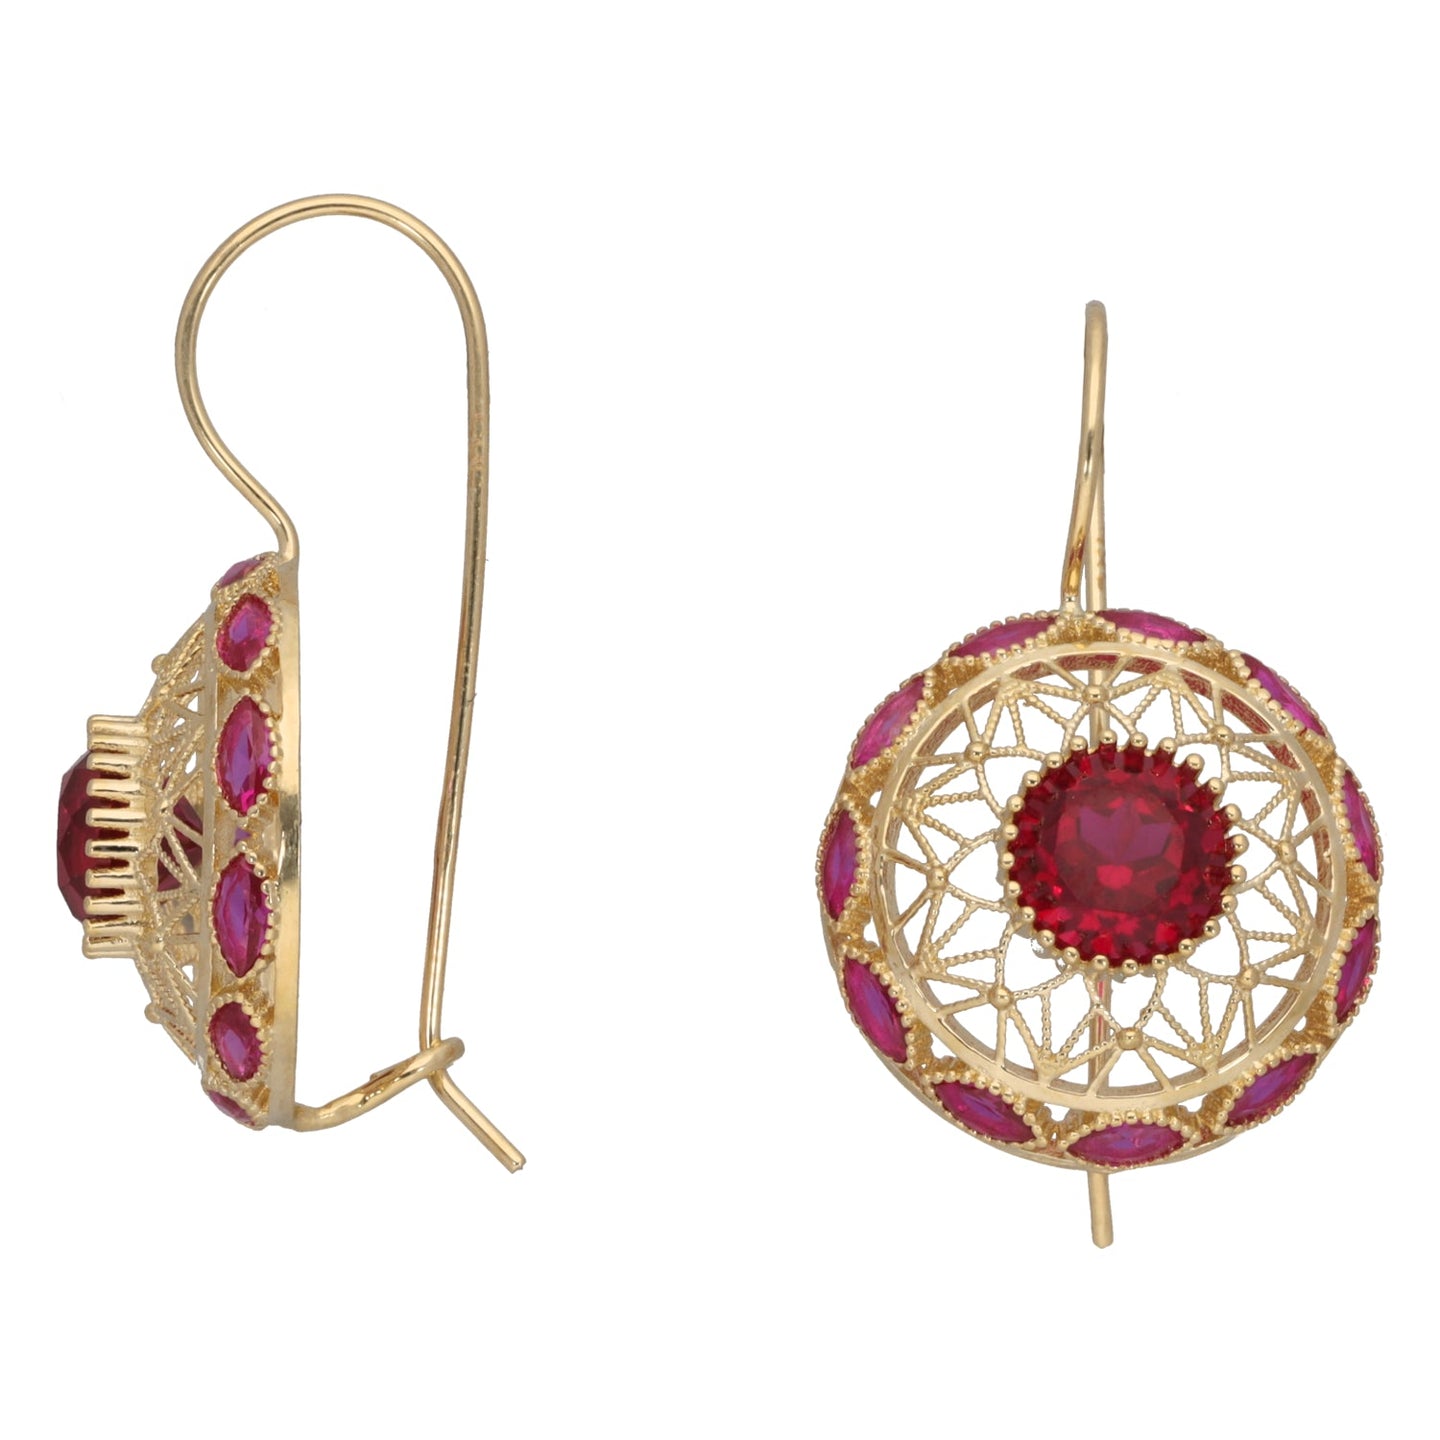 New 14ct Gold Red Stone Dress/Cocktail Earrings